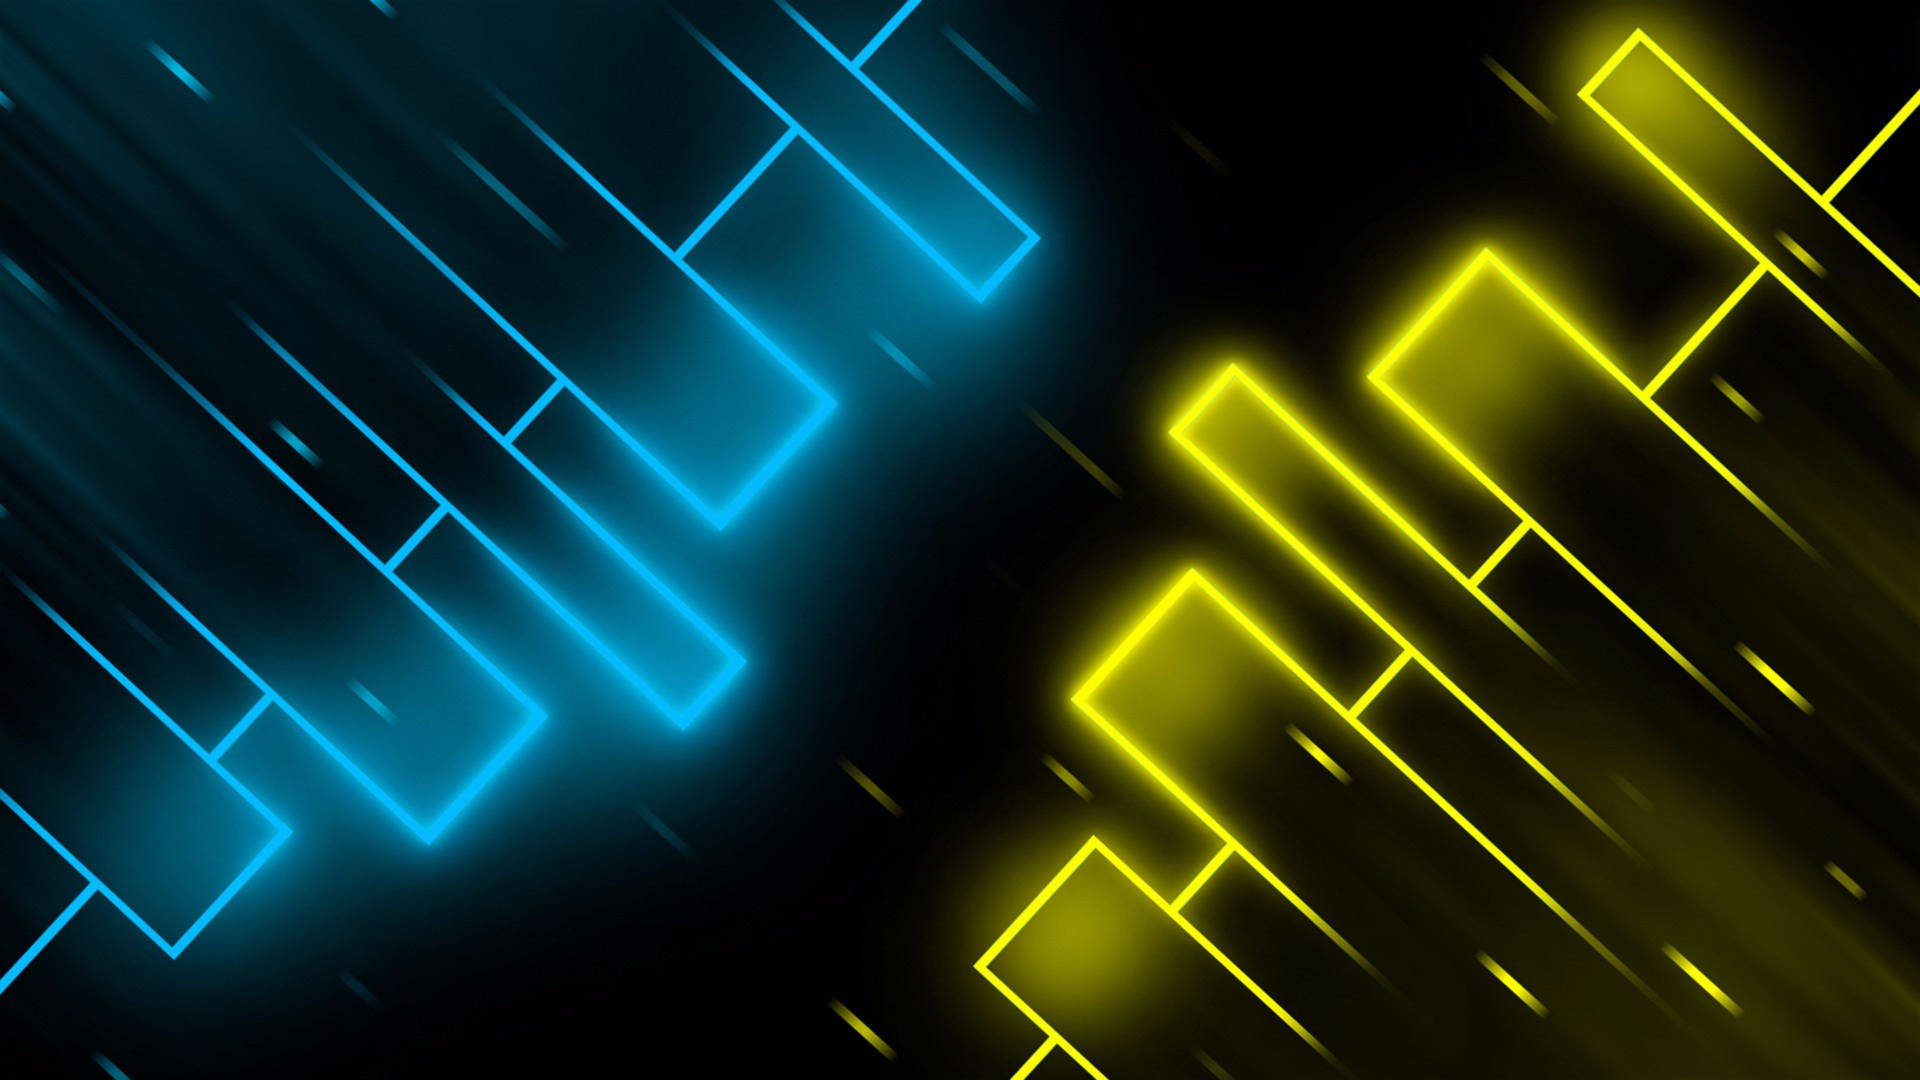 Blue And Gold Glowing Lights Wallpaper